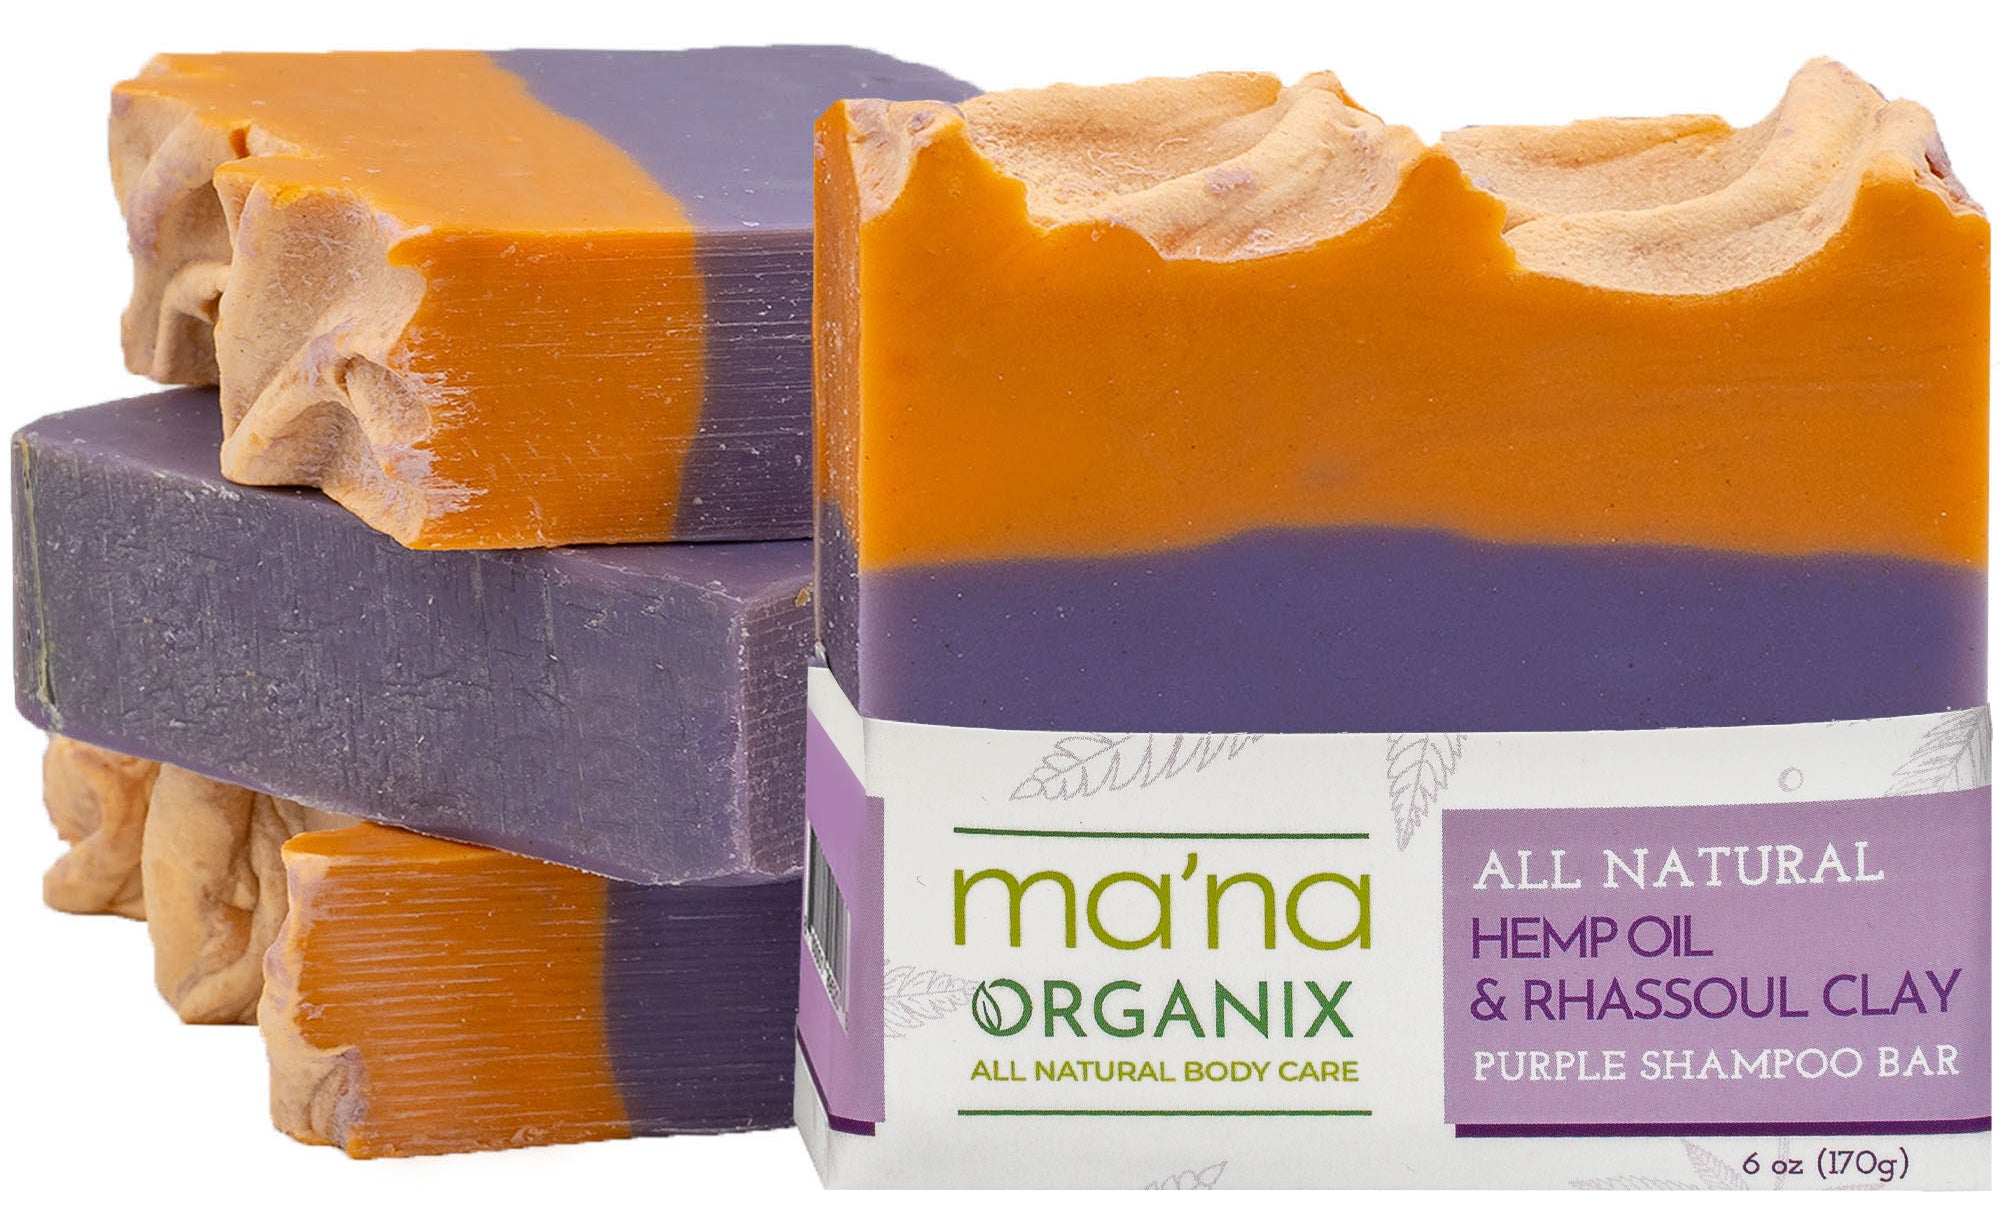 All Natural Hemp Oil & Rhassoul Clay Purple Shampoo Bar for Blonde or Silver Hair with Ecofriendly and Biodegradable Packaging (6 oz.)